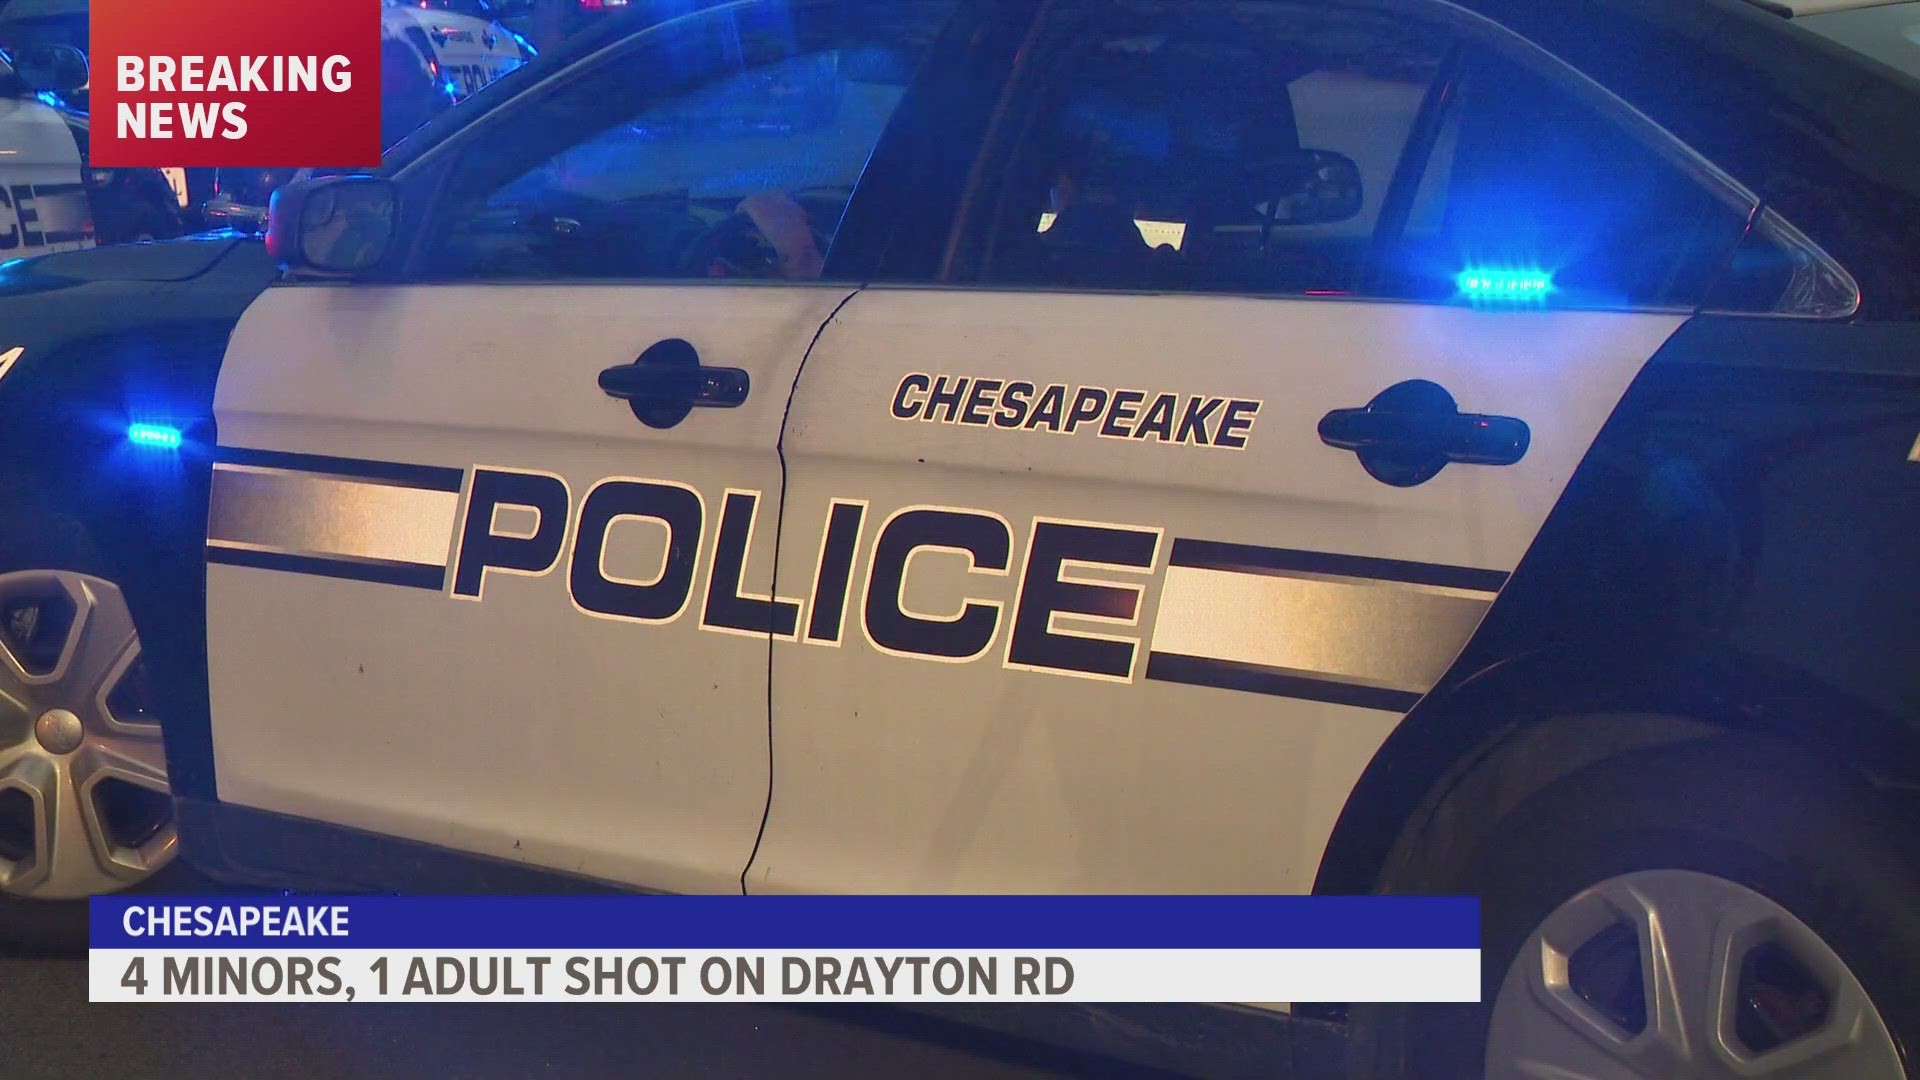 The shooting happened in the 1300 block of Drayton Road just after 5 p.m. Saturday.